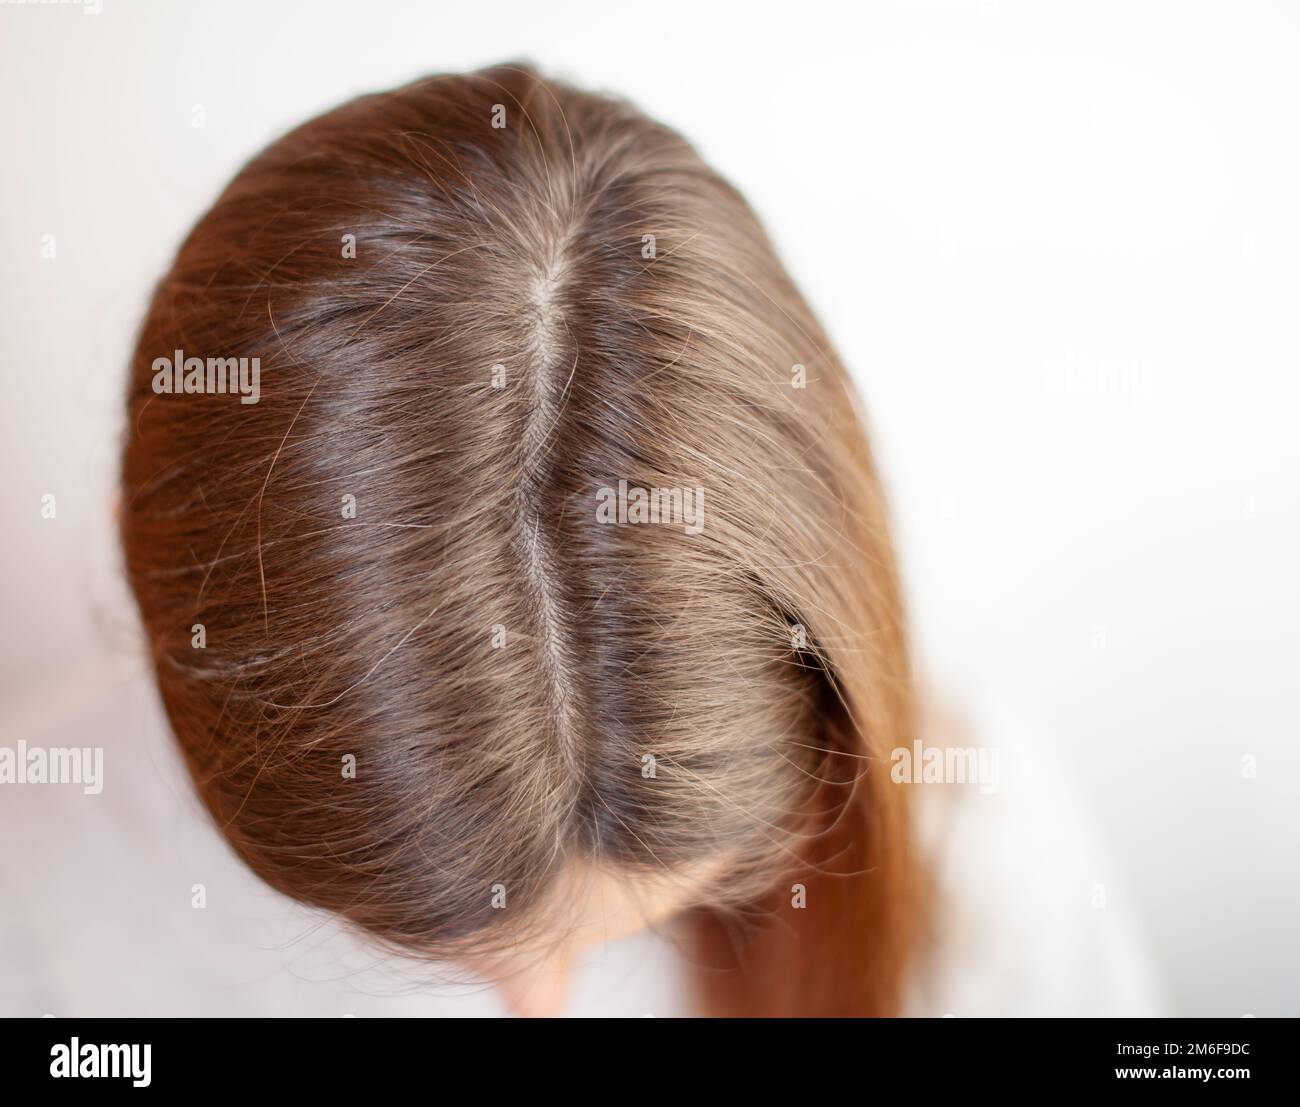 A woman's head with a parting of gray hair. Stock Photo